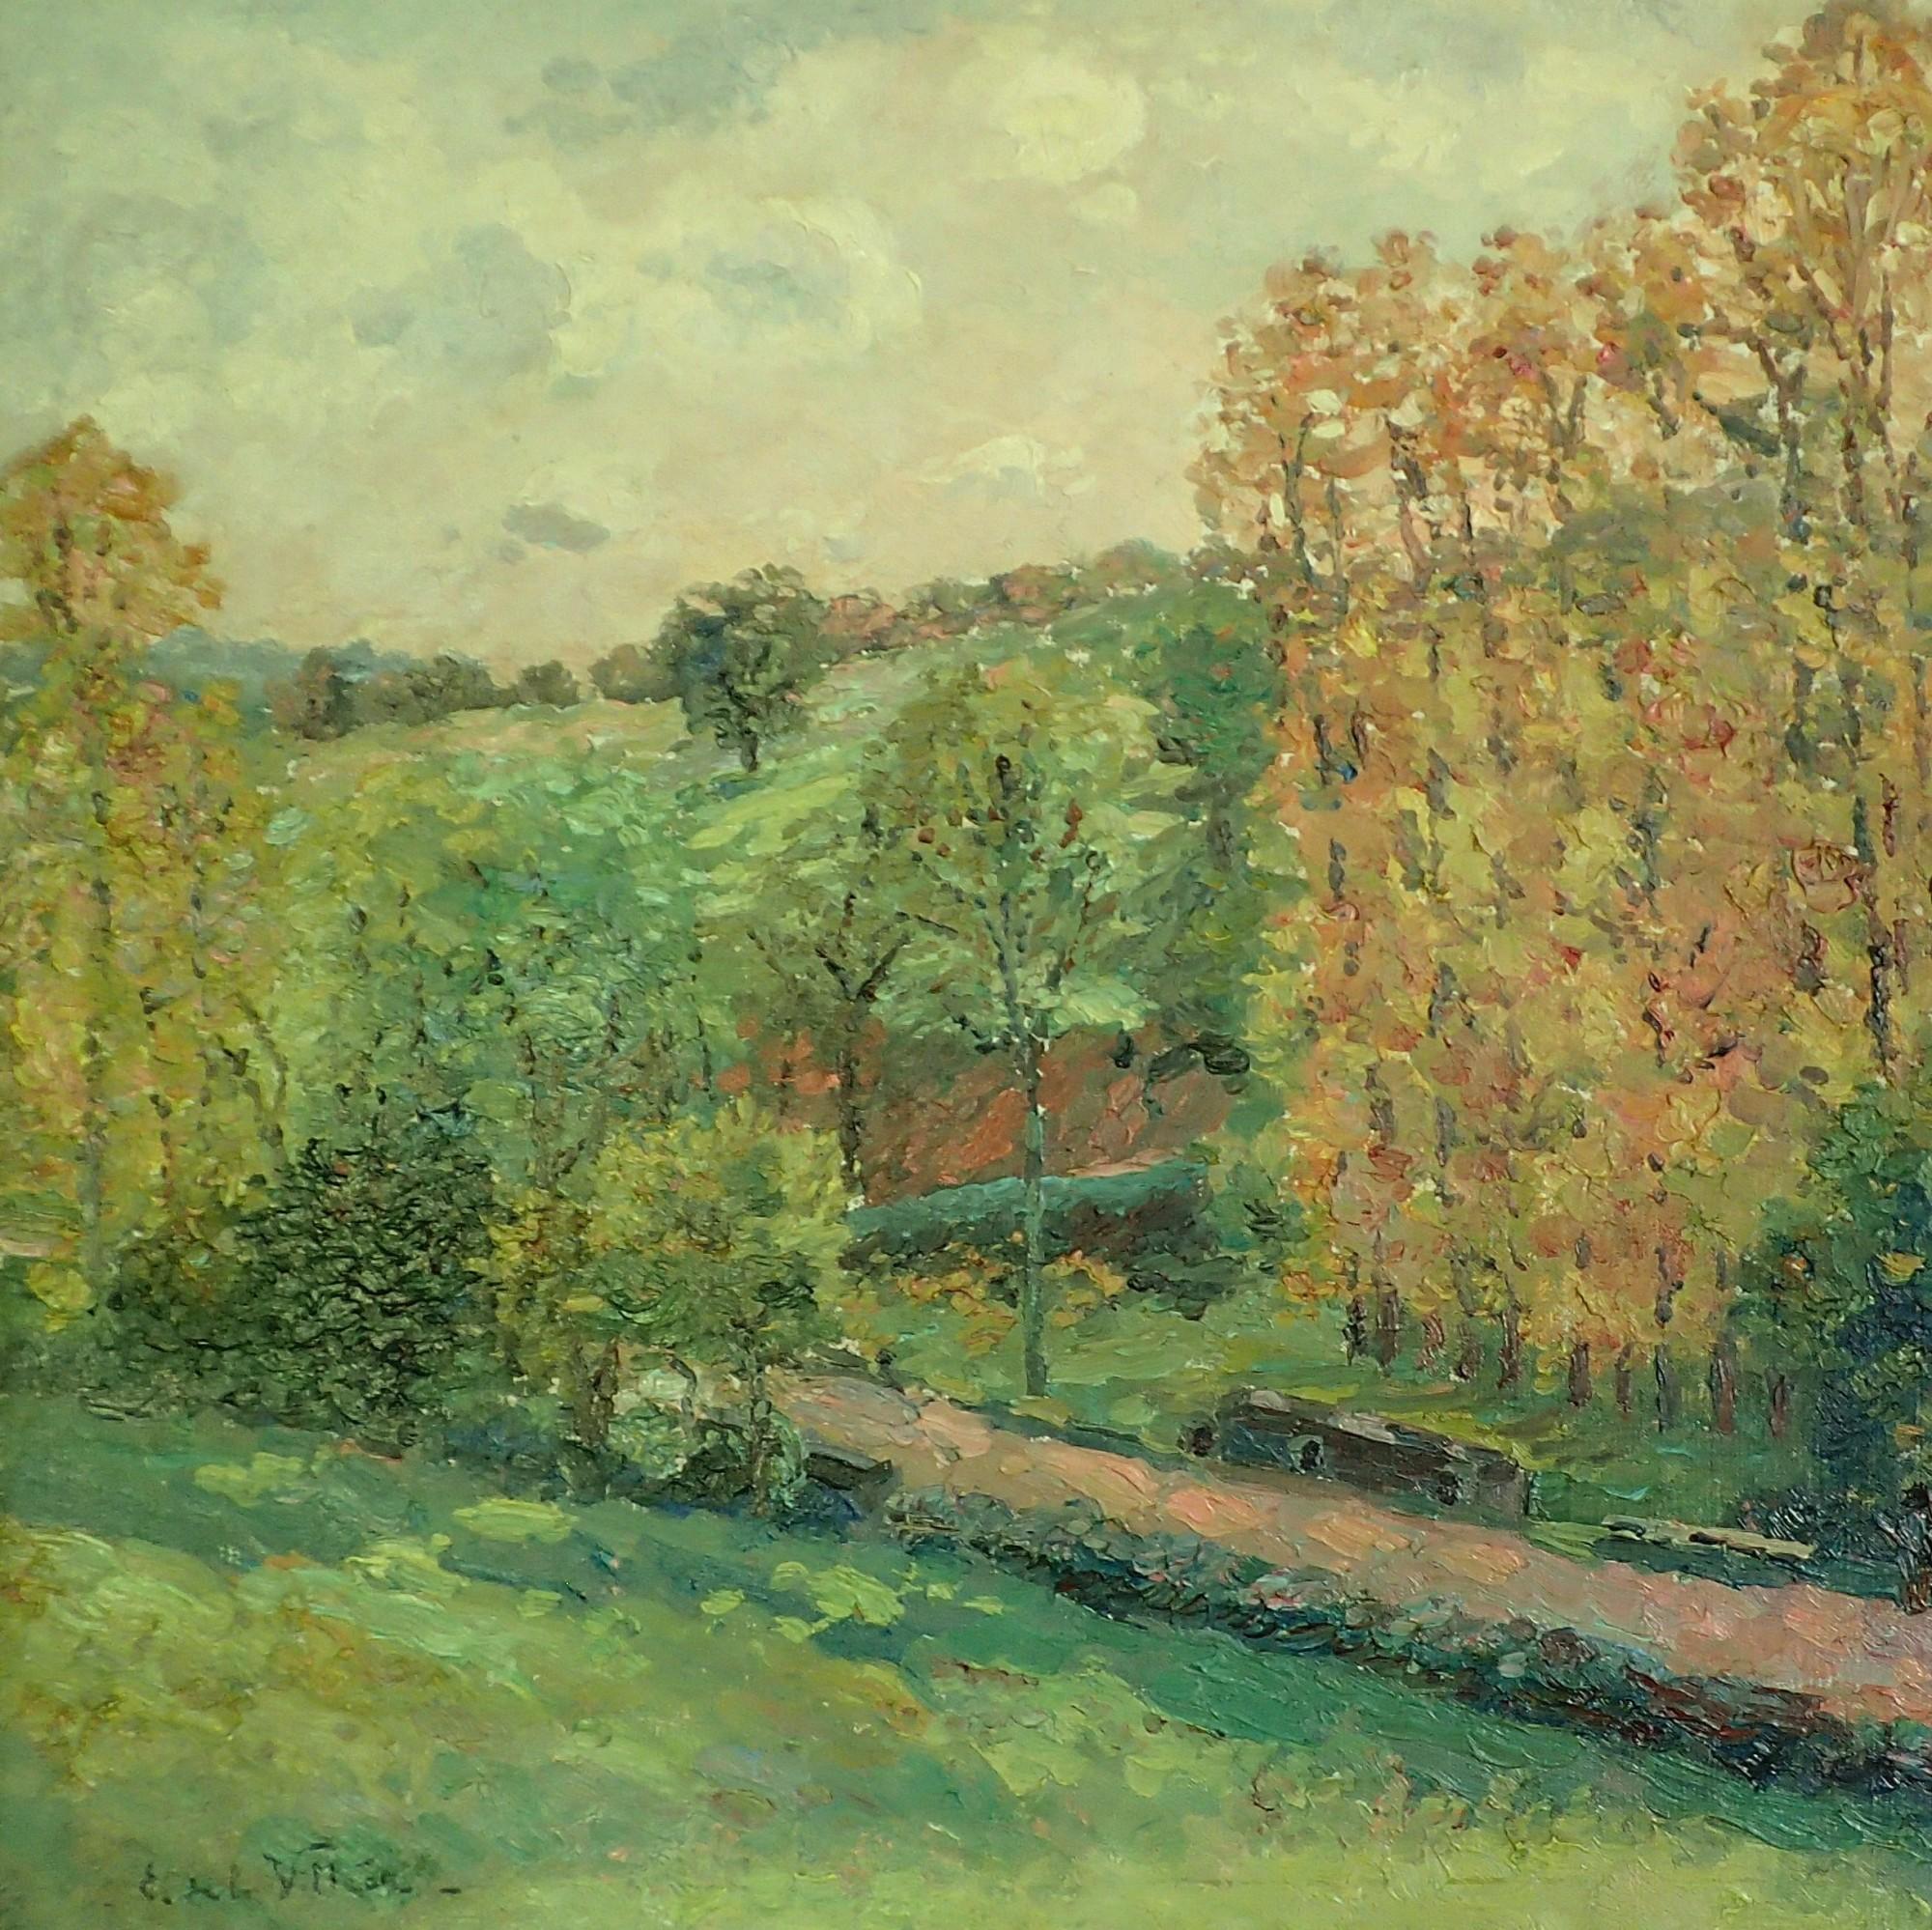 

A lovely Oil Painting on Panel of ‘The Poplars In Autumn’ By Emmanuel de la Villéon.

Emmanuel de la Villéon was born on May 29, 1858, in Fougères, Brittany, where today a museum celebrates his life and paintings.
Coming from an old Breton